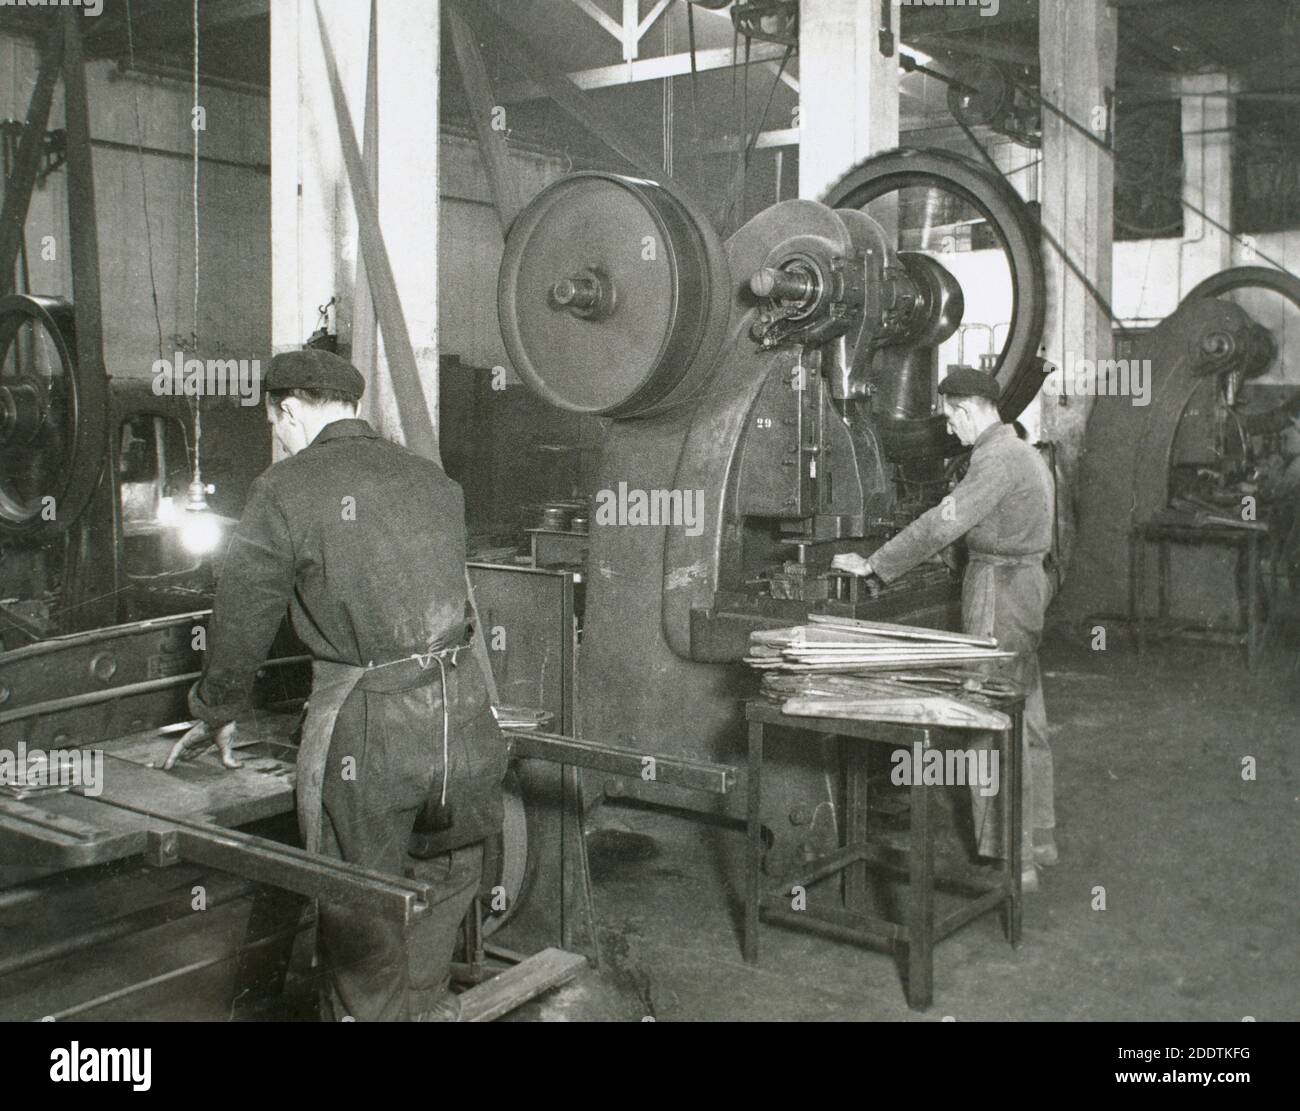 Spanish Industry, 1945. Production line of a company dedicated to the manufacture of motorcycle components. Metal stamping, presses section. Spain, Catalonia, Barcelona. Stock Photo